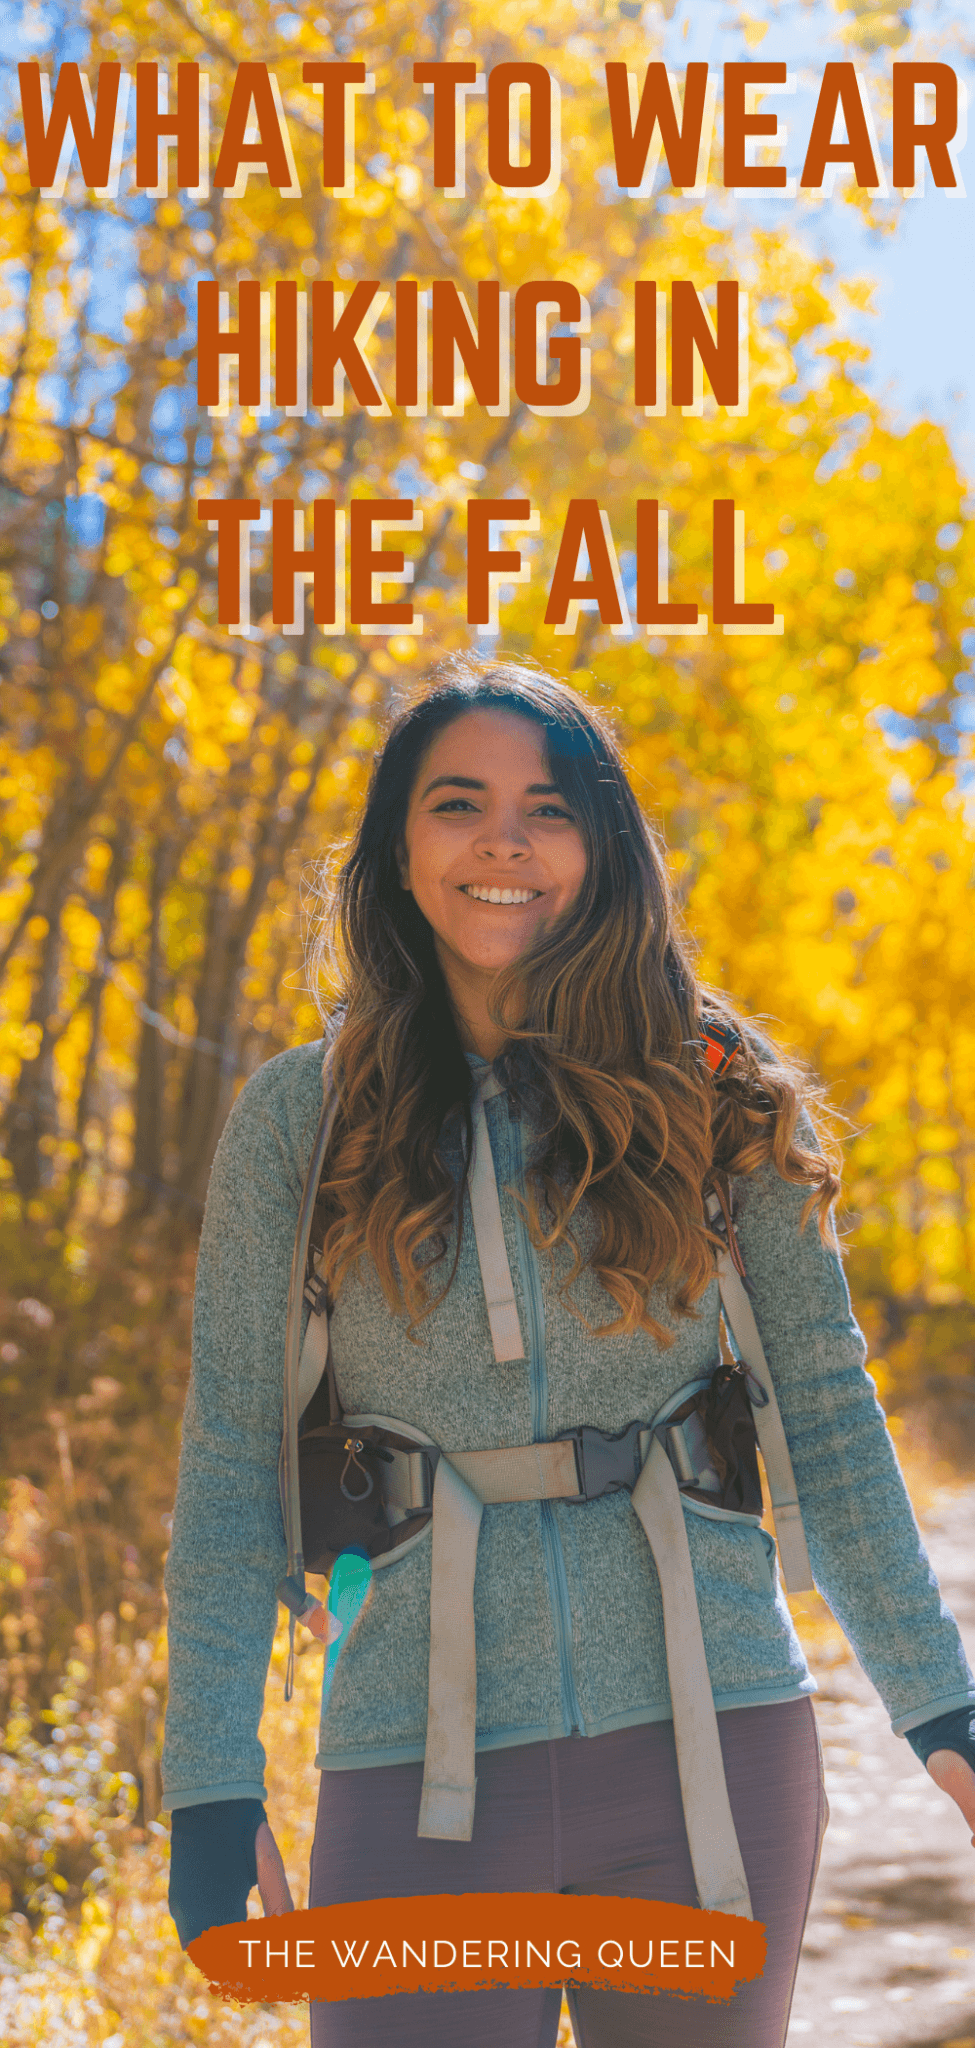 Fall Hiking Gear: What to Wear and Pack - Play Outside Guide